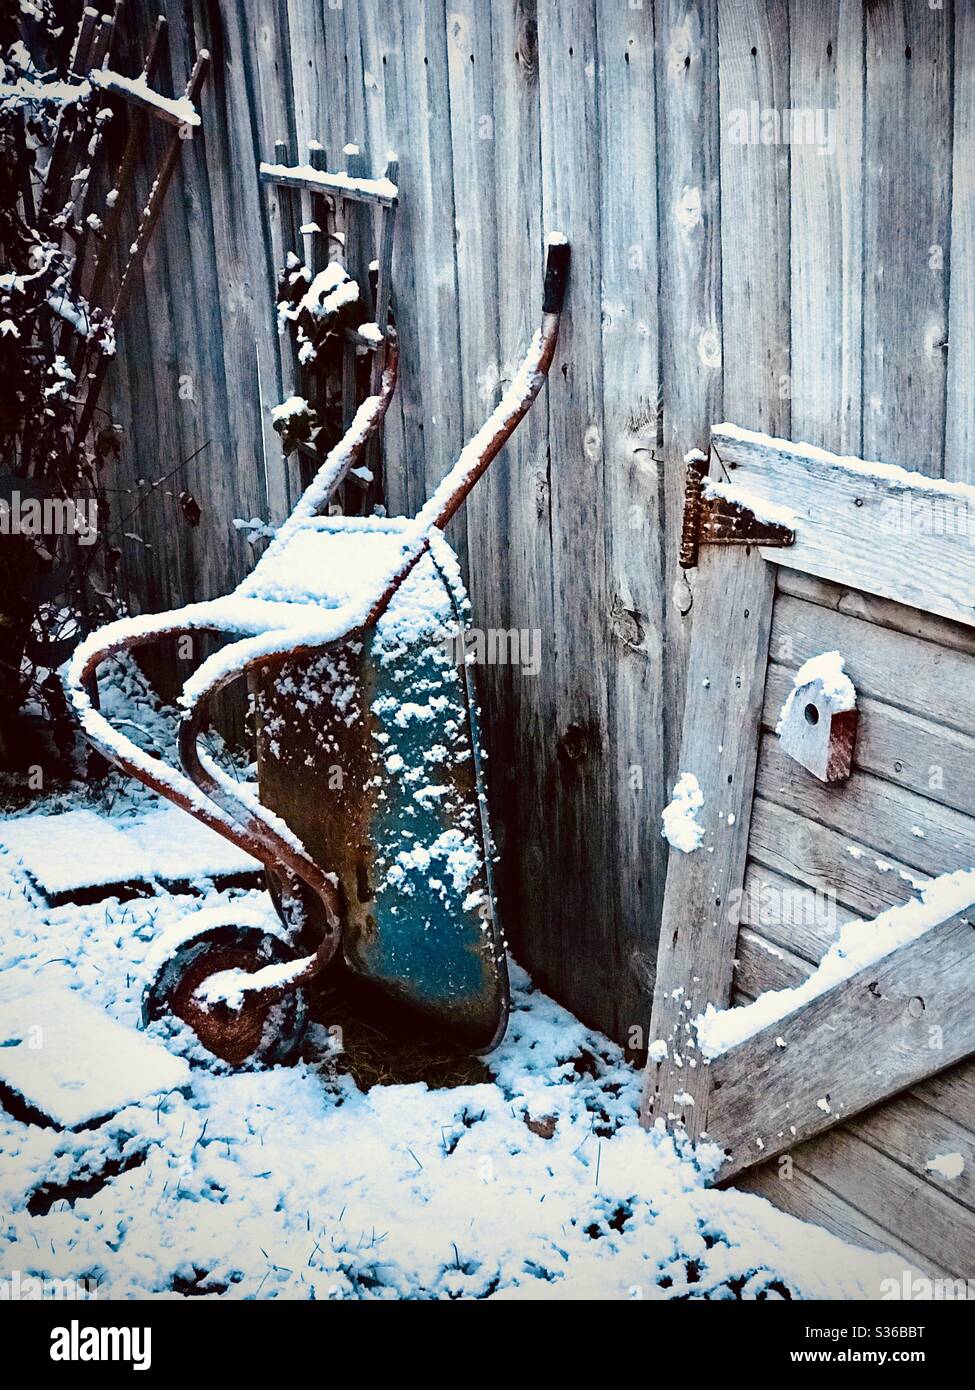 A wheelbarrow leaning against a wood fence in the winter snow. Stock Photo